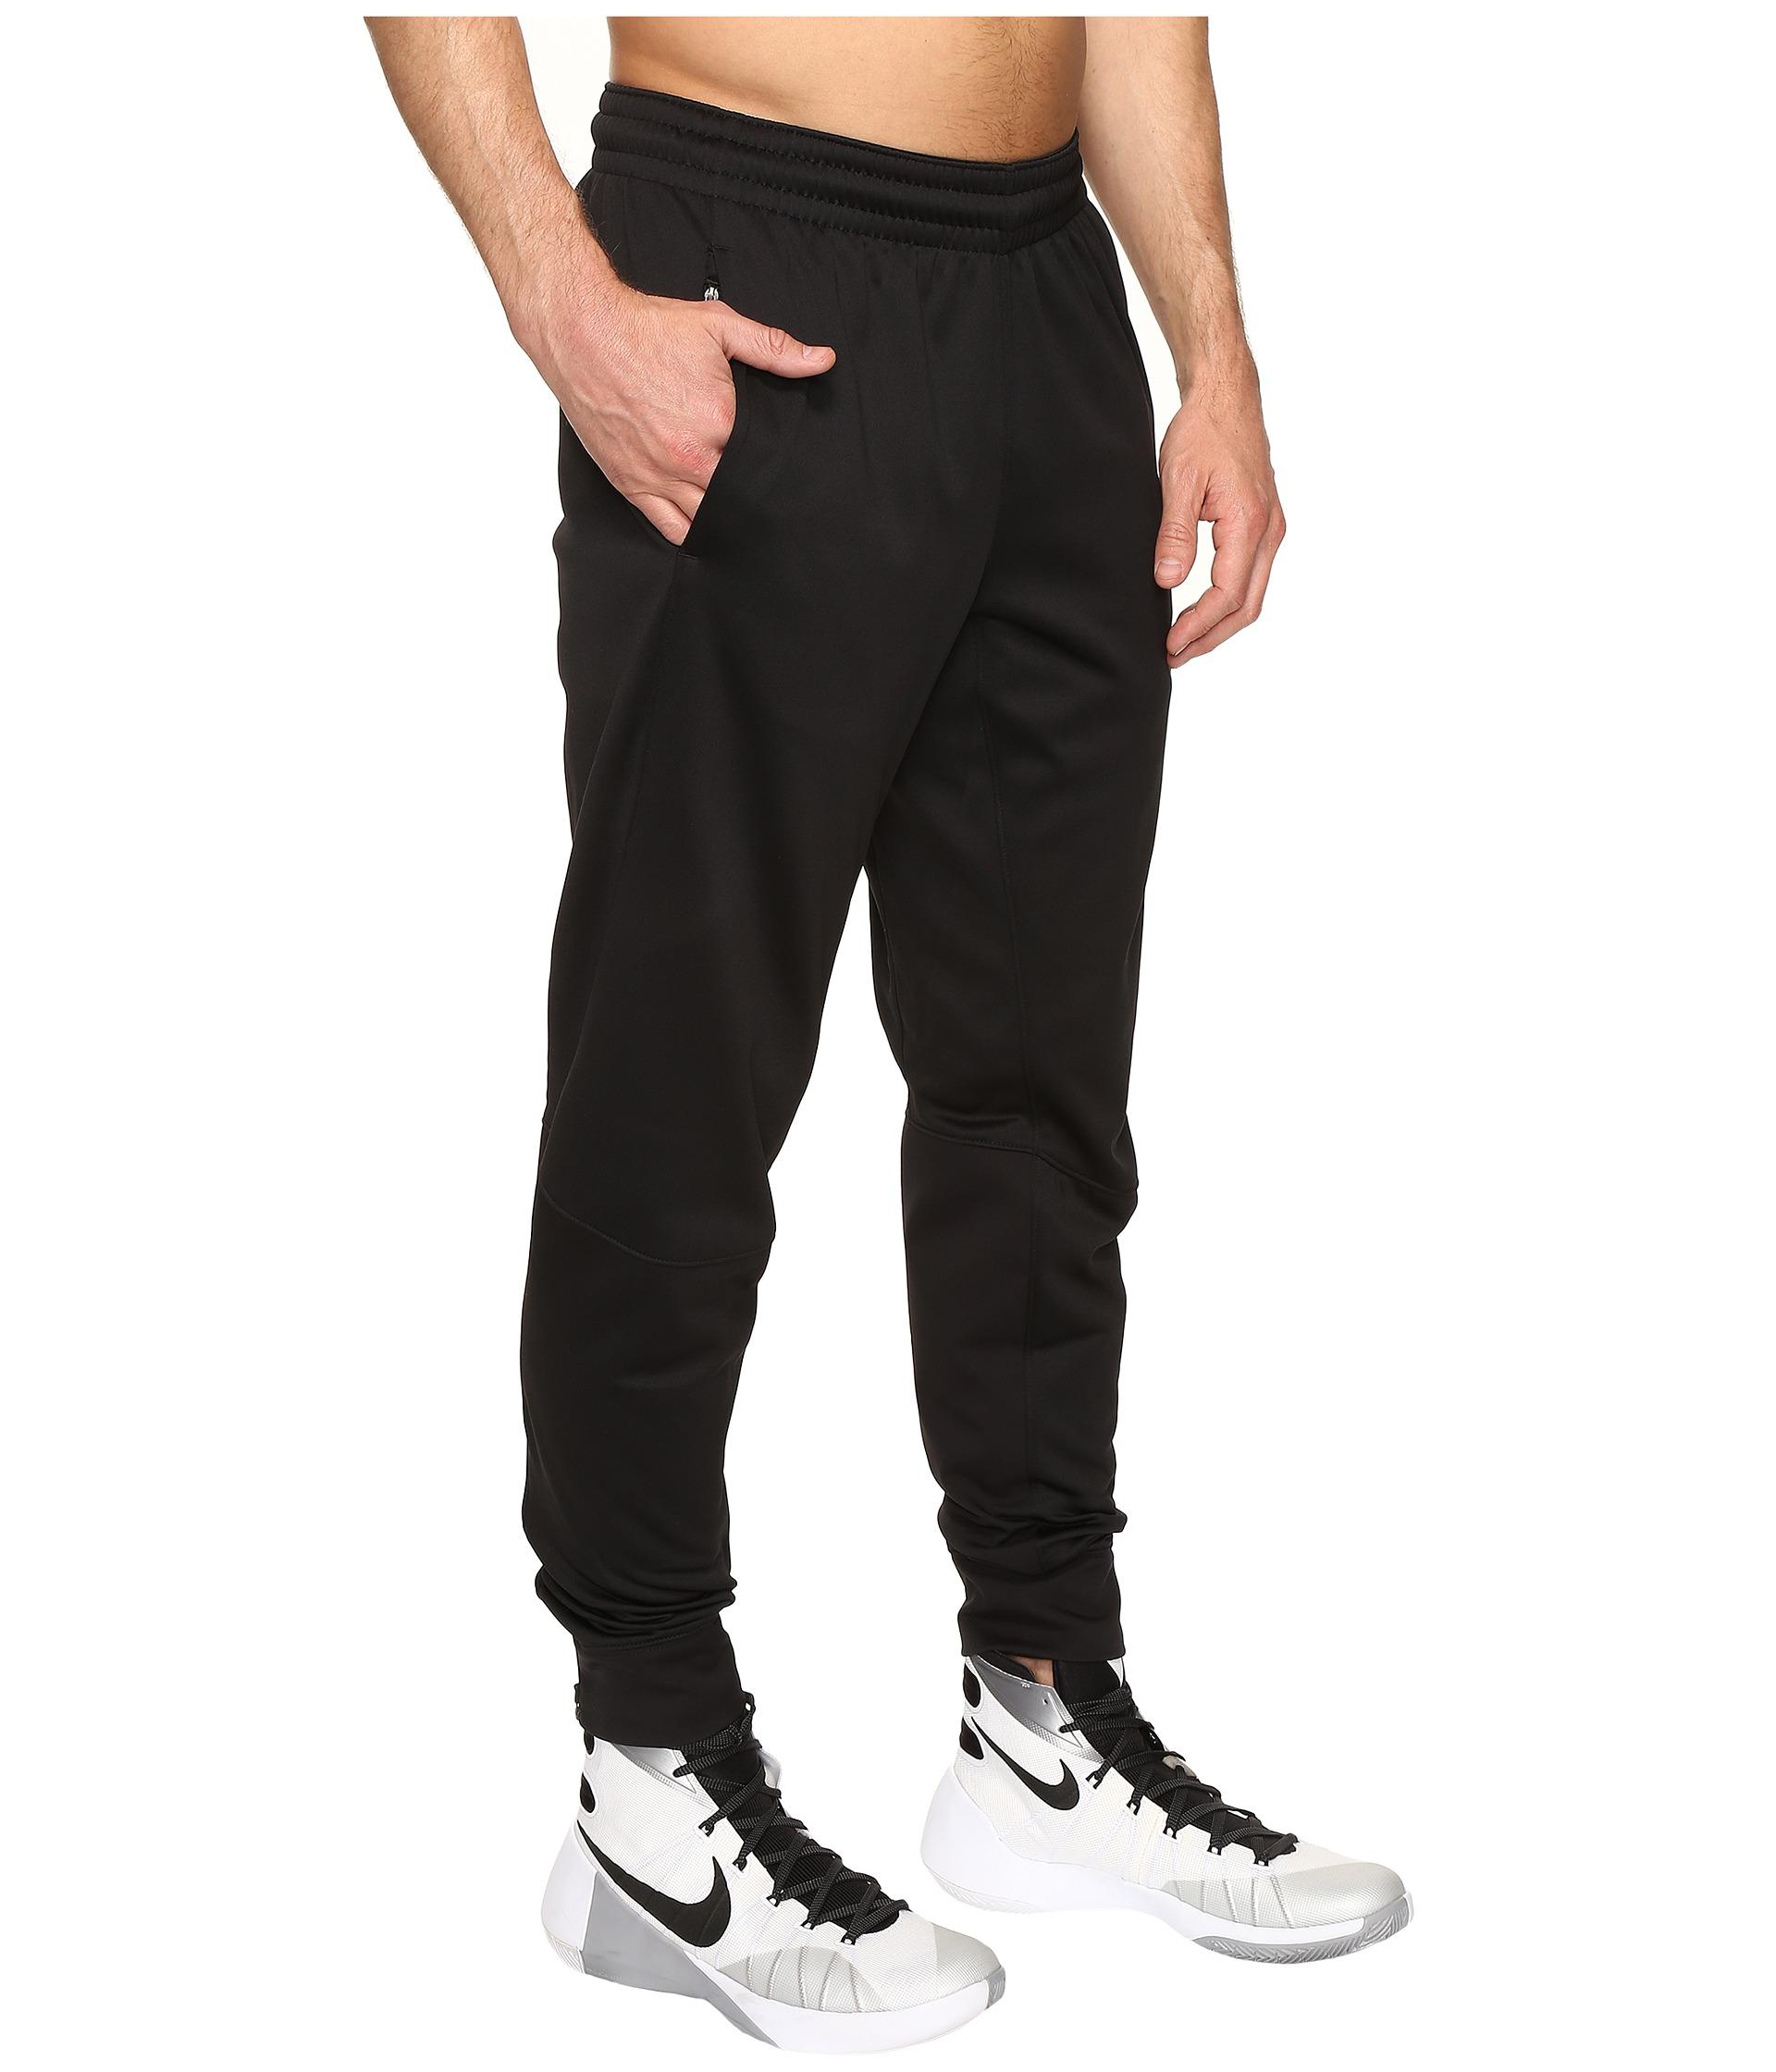 Nike Synthetic Therma Hyper Elite Basketball Pant in Black for Men - Lyst